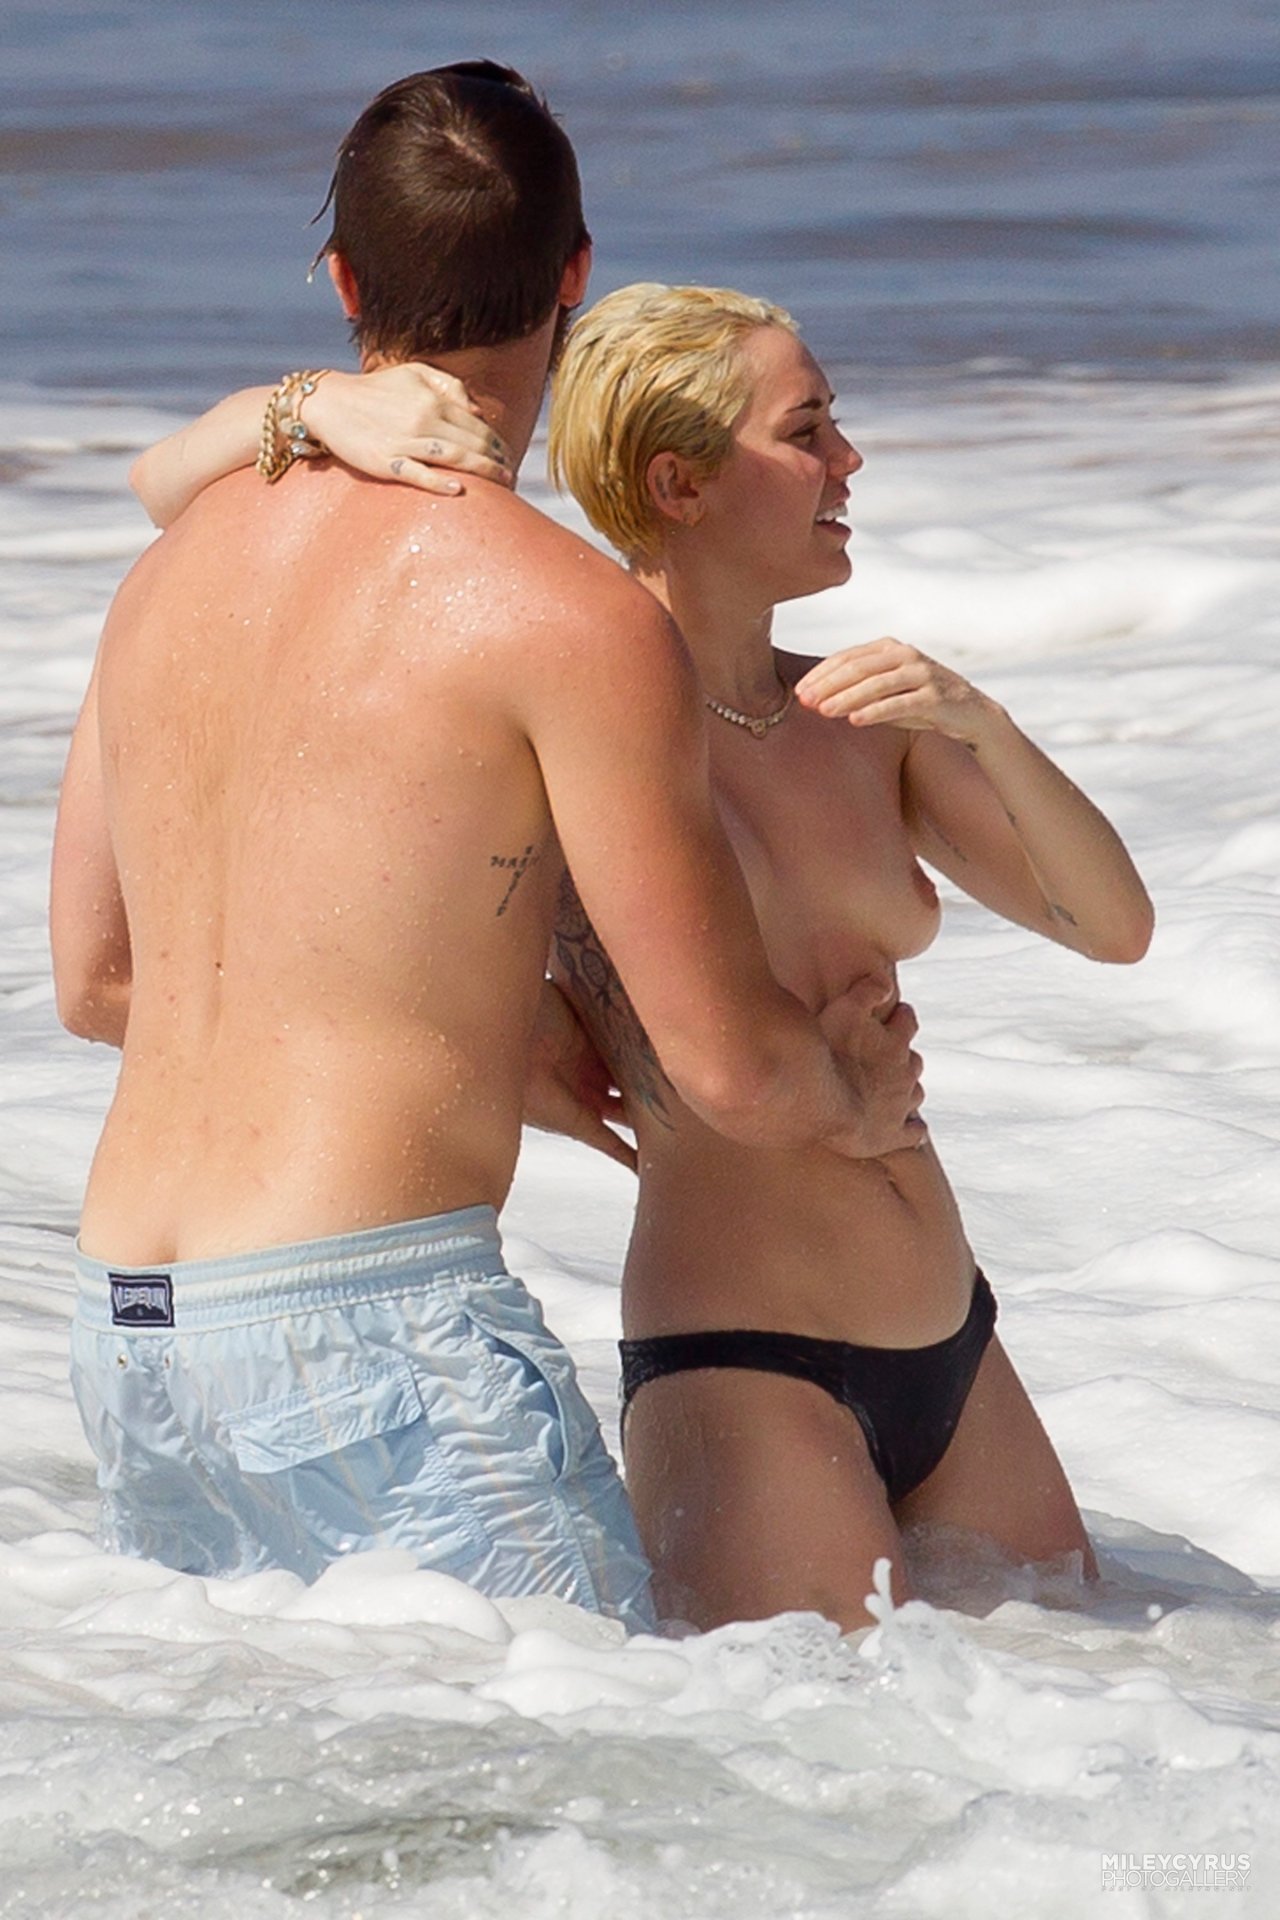 toplessbeachcelebs:  Miley Cyrus (Singer) swimming topless in Hawaii (January 2015) -